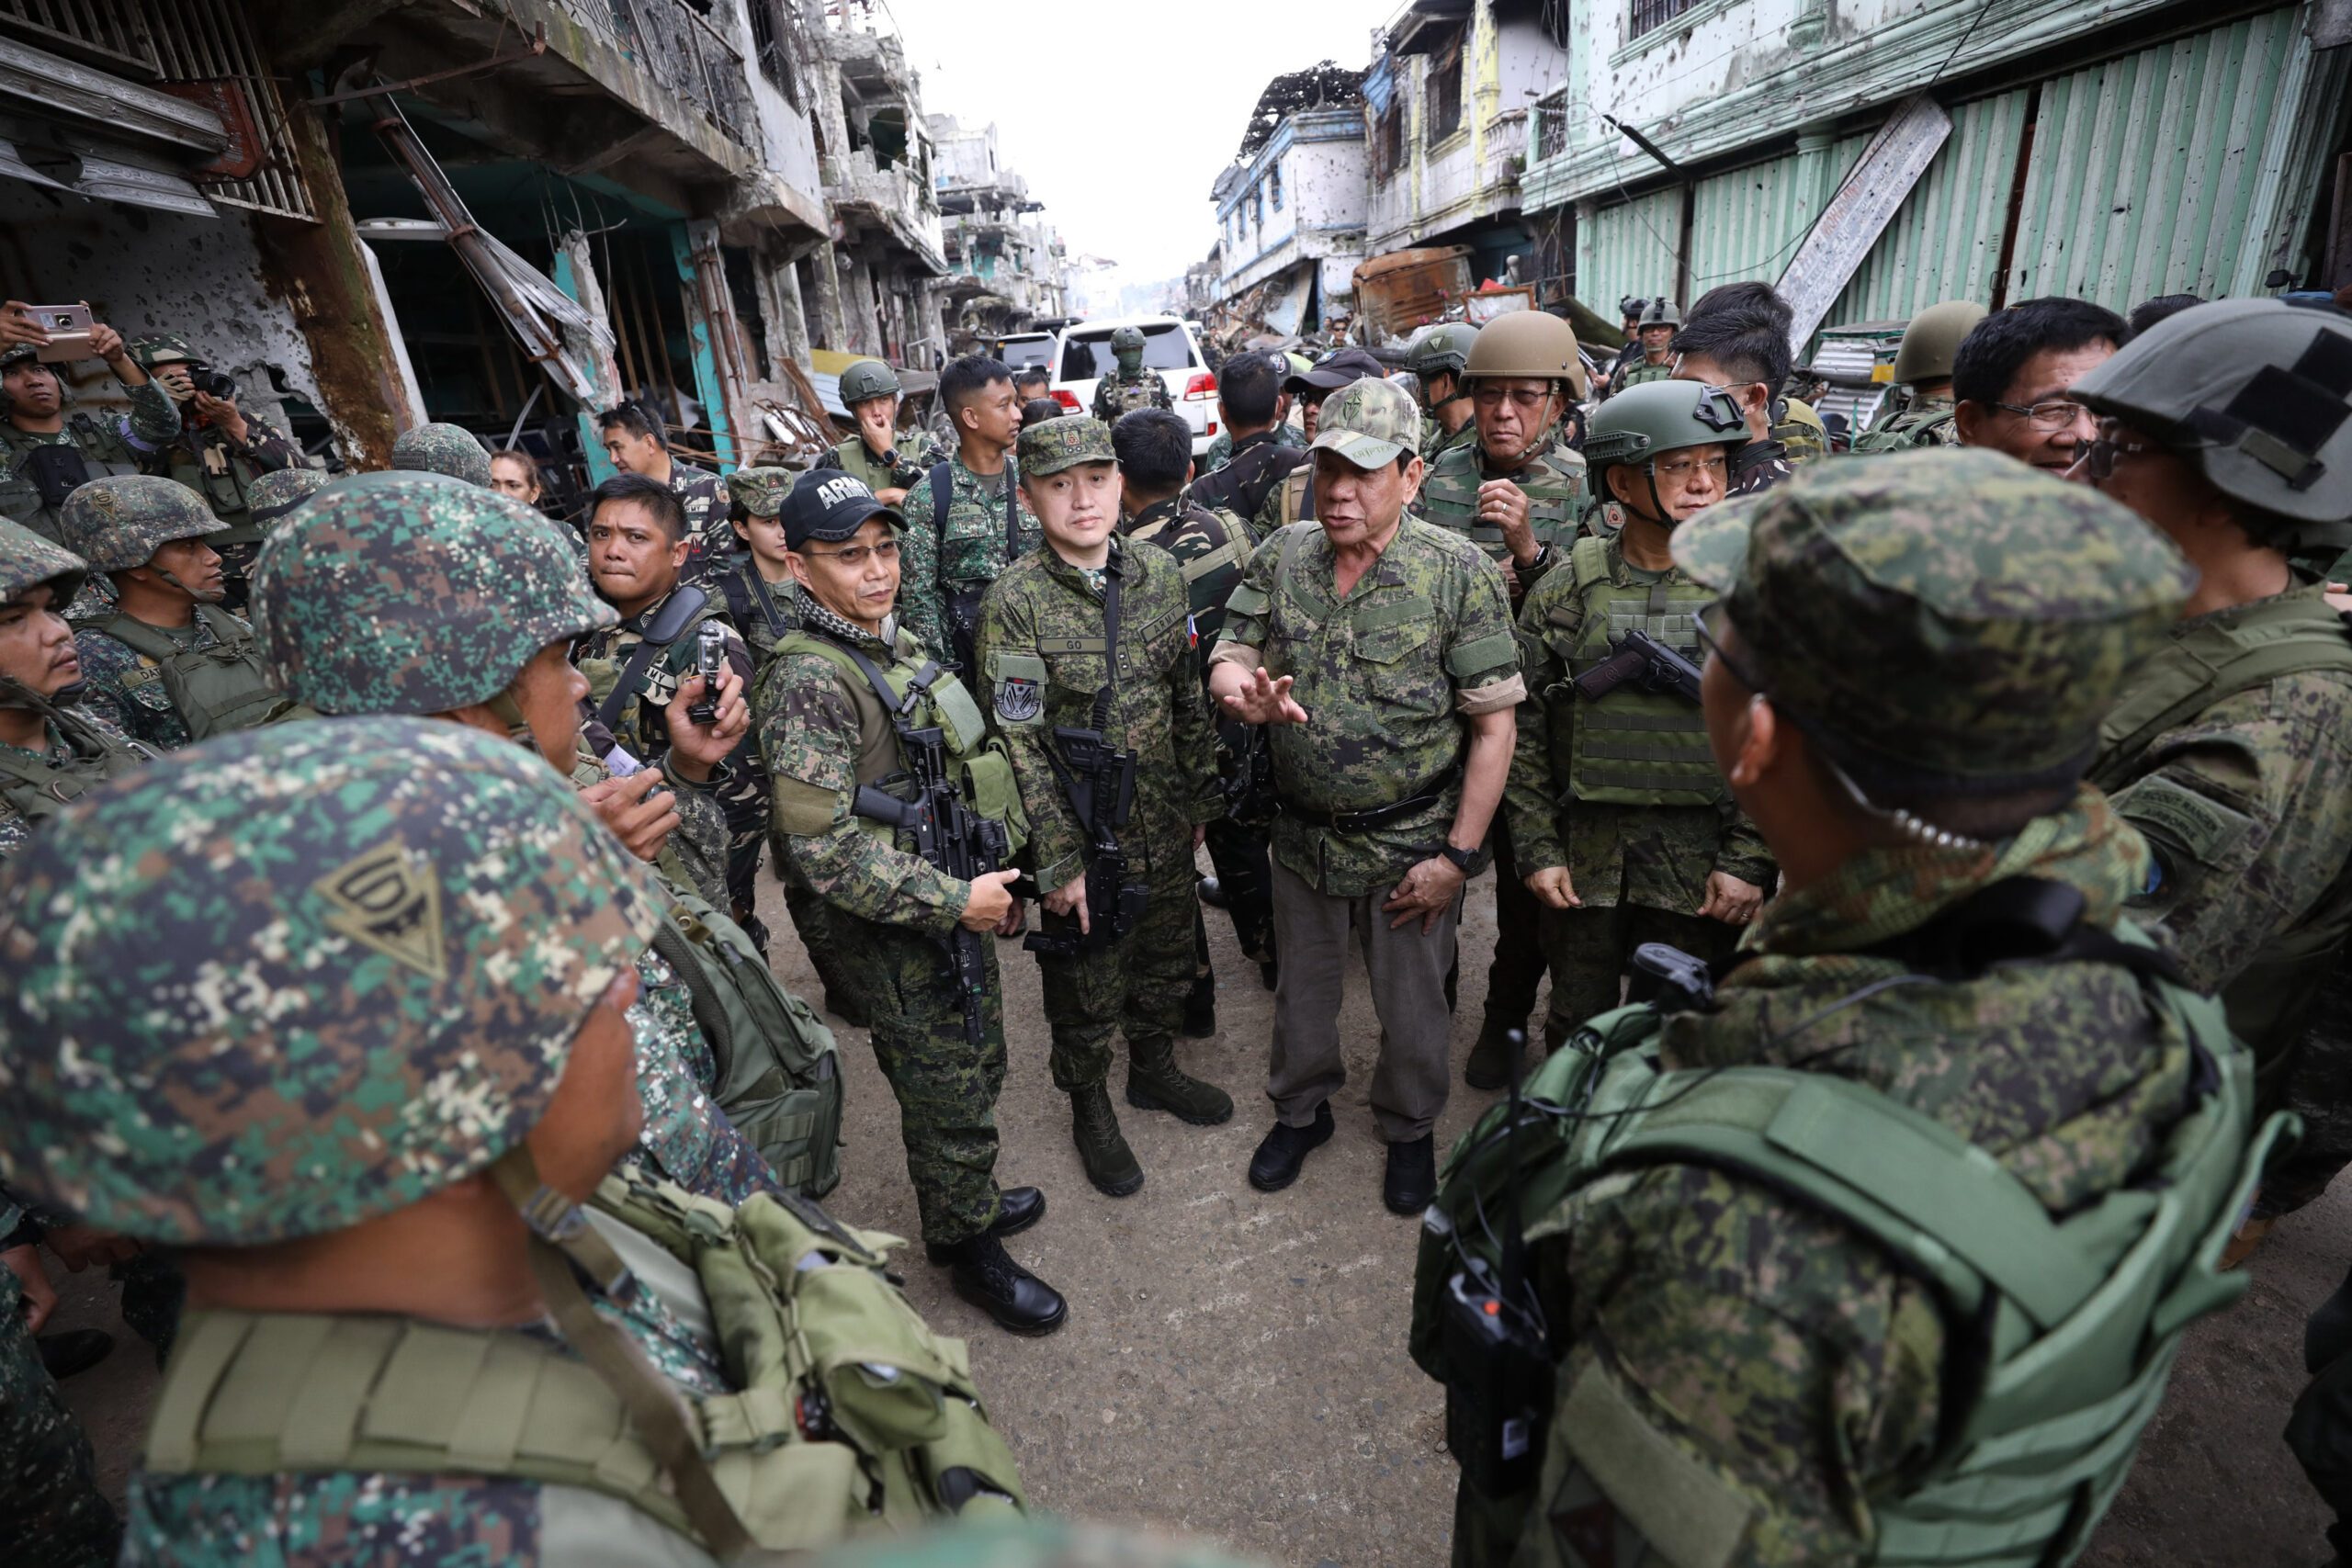 5 Maute fighters ‘killed’ in firefight after Duterte visit – military